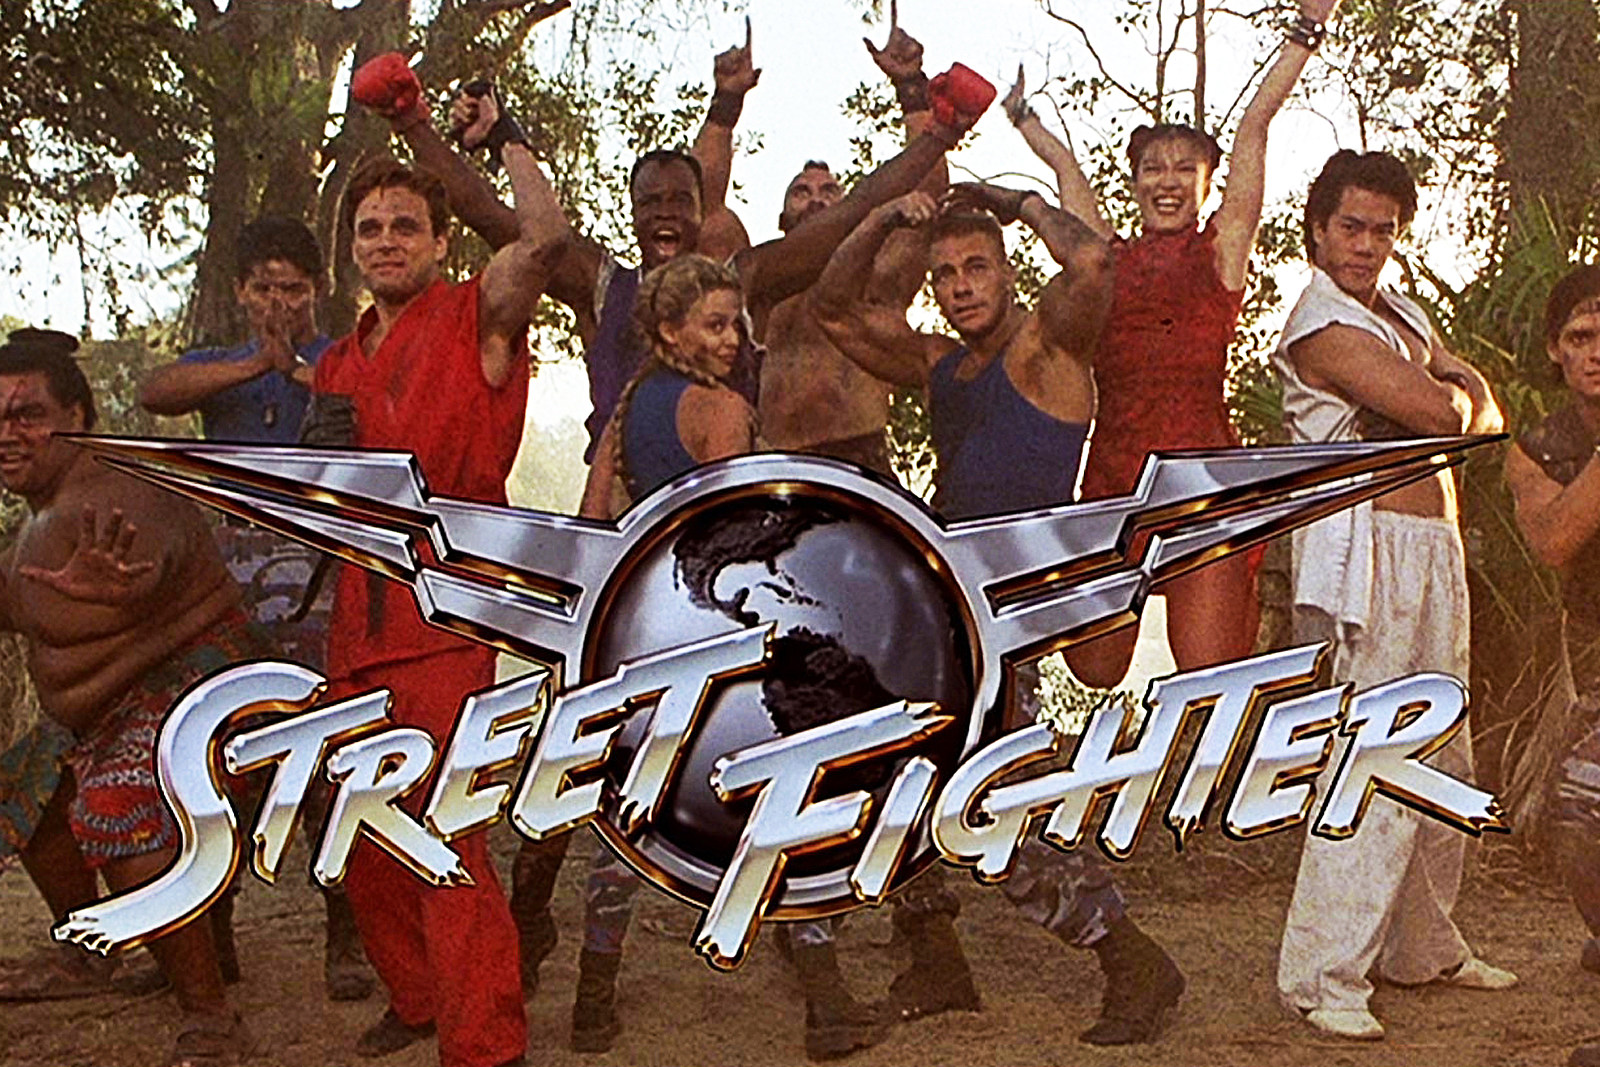 New 'Street Fighter' Movie Finds Its Directors